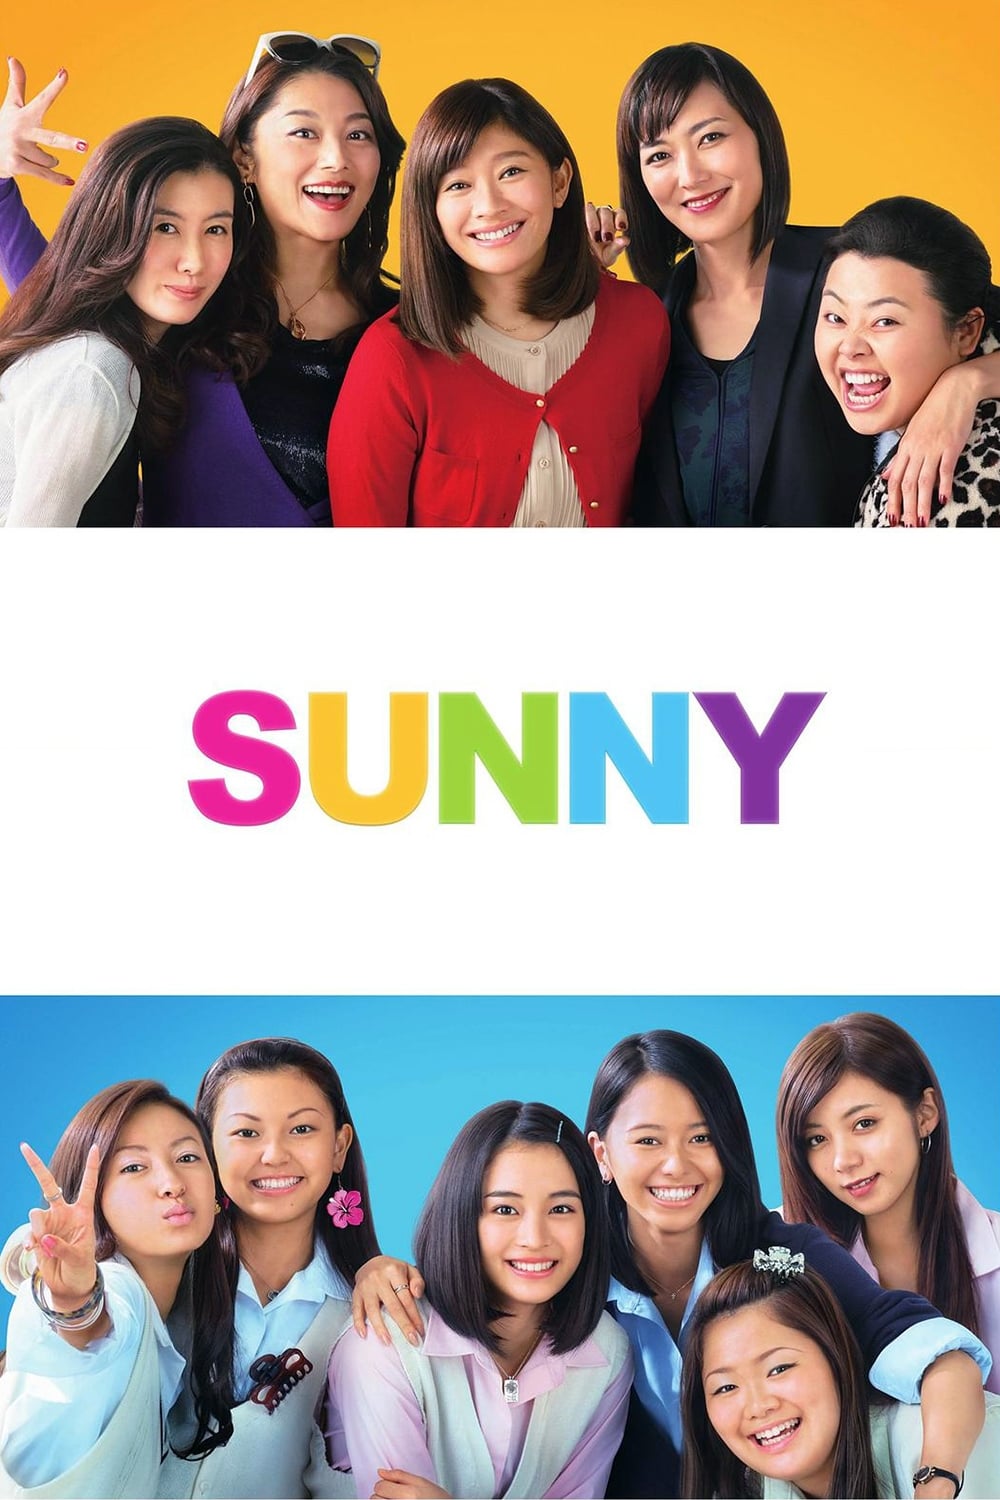 SUNNY 強い気持ち・強い愛 – Sunny Our Hearts Beat Together 2018 1080p HDTV x264